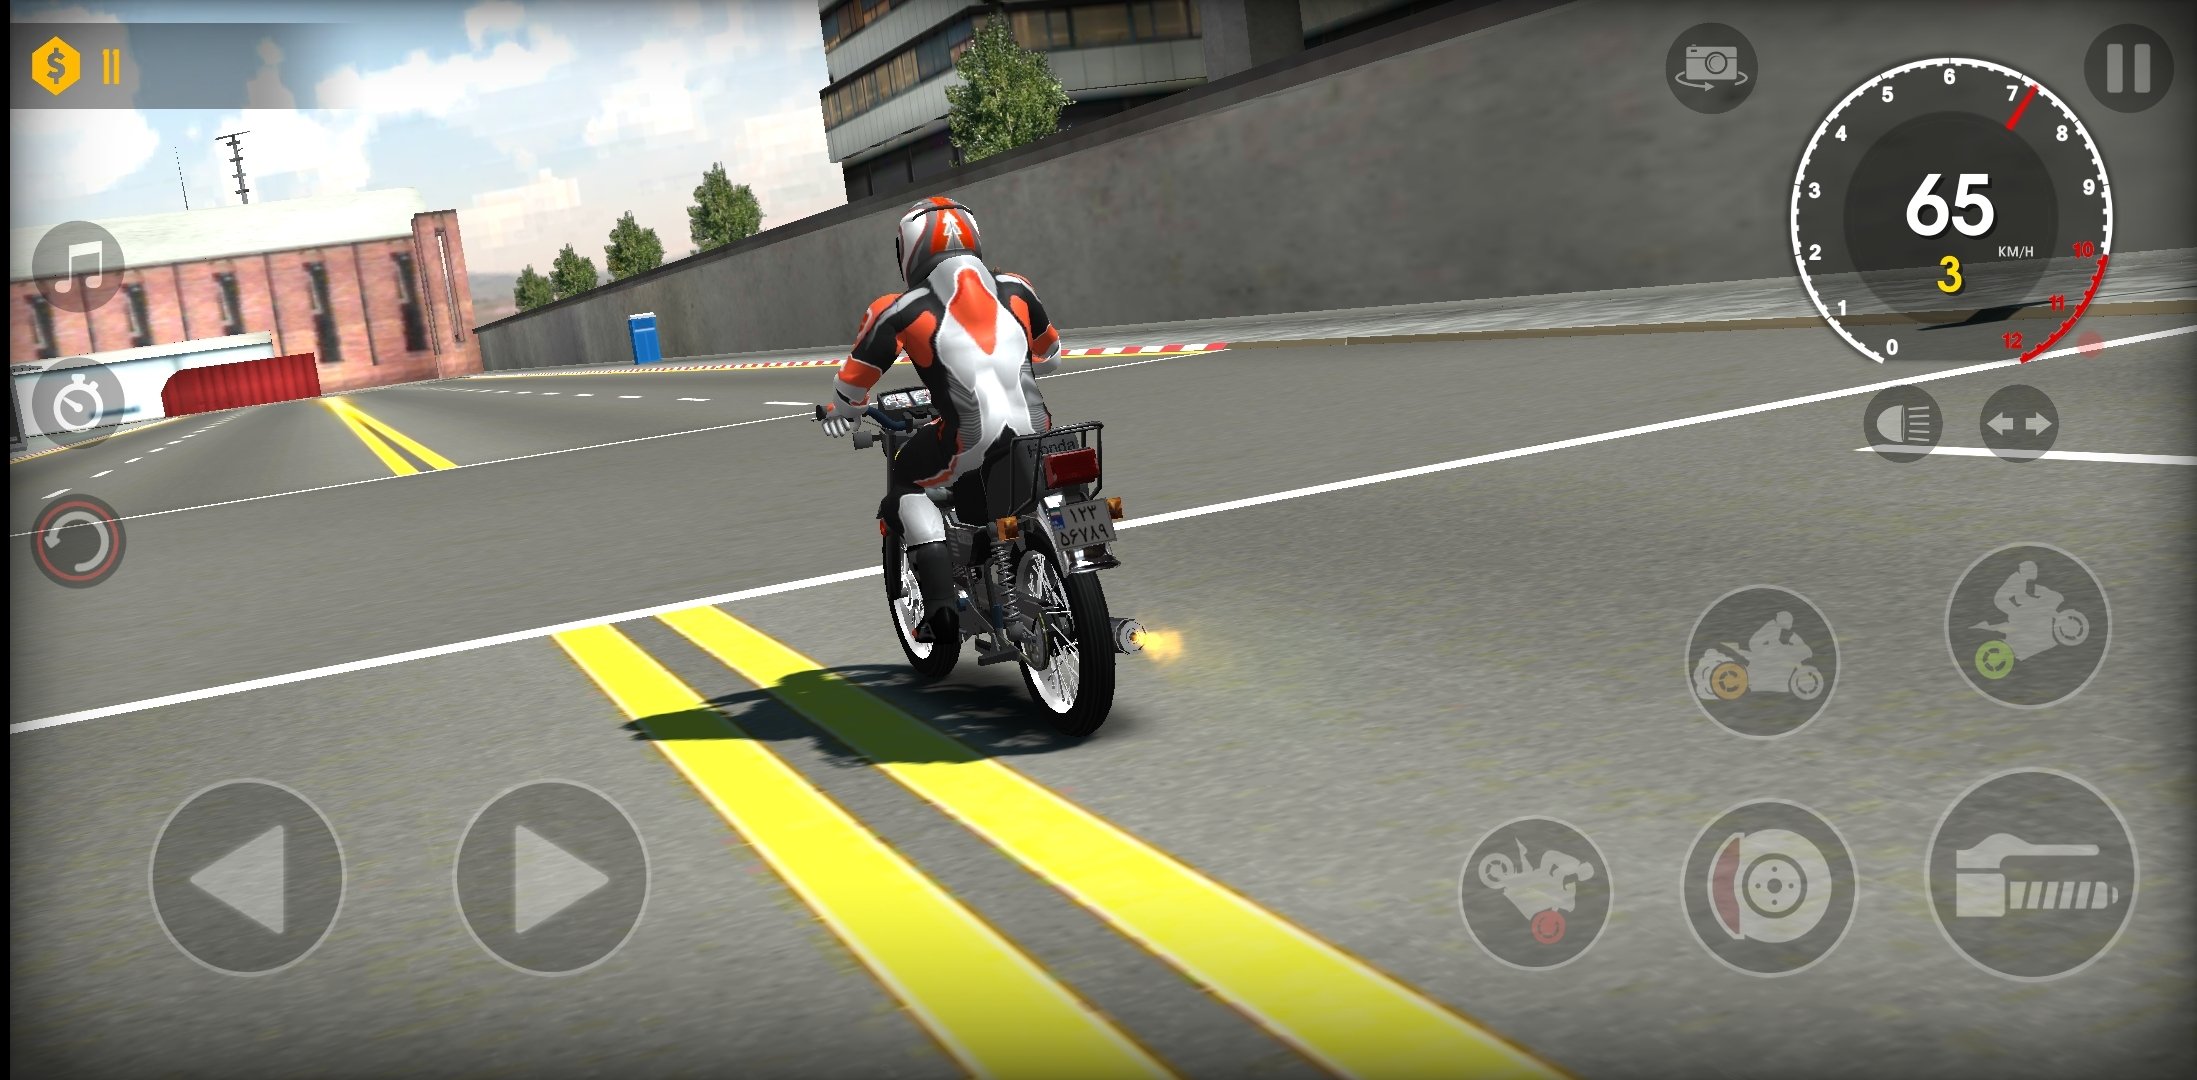 Xtreme Motorbikes 1.5 - Download for Android APK Free